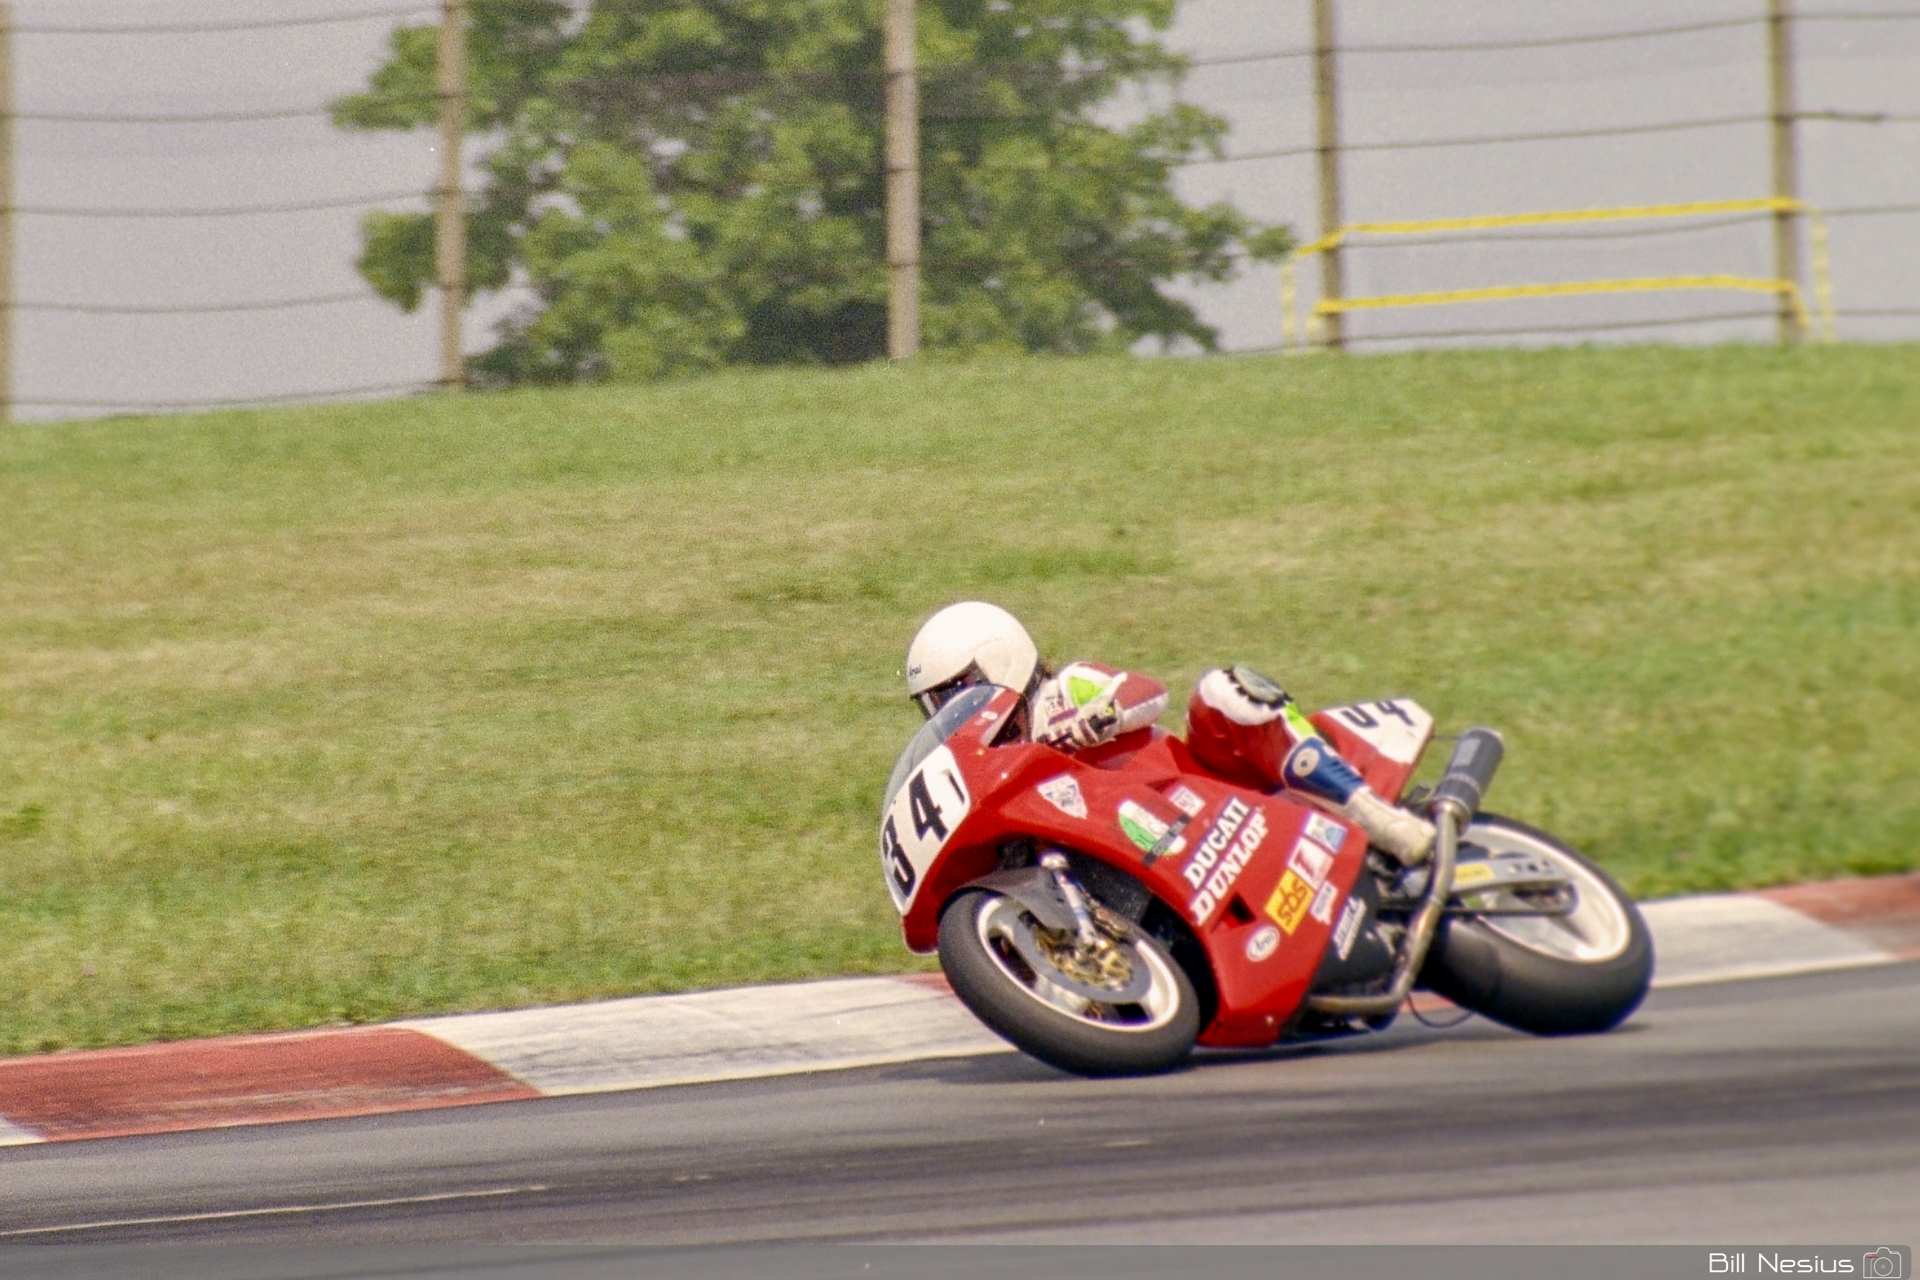 Pascal Picotte on the Number 34 Fast by Ferracci Ducati 851 / FLM_7767 / 2